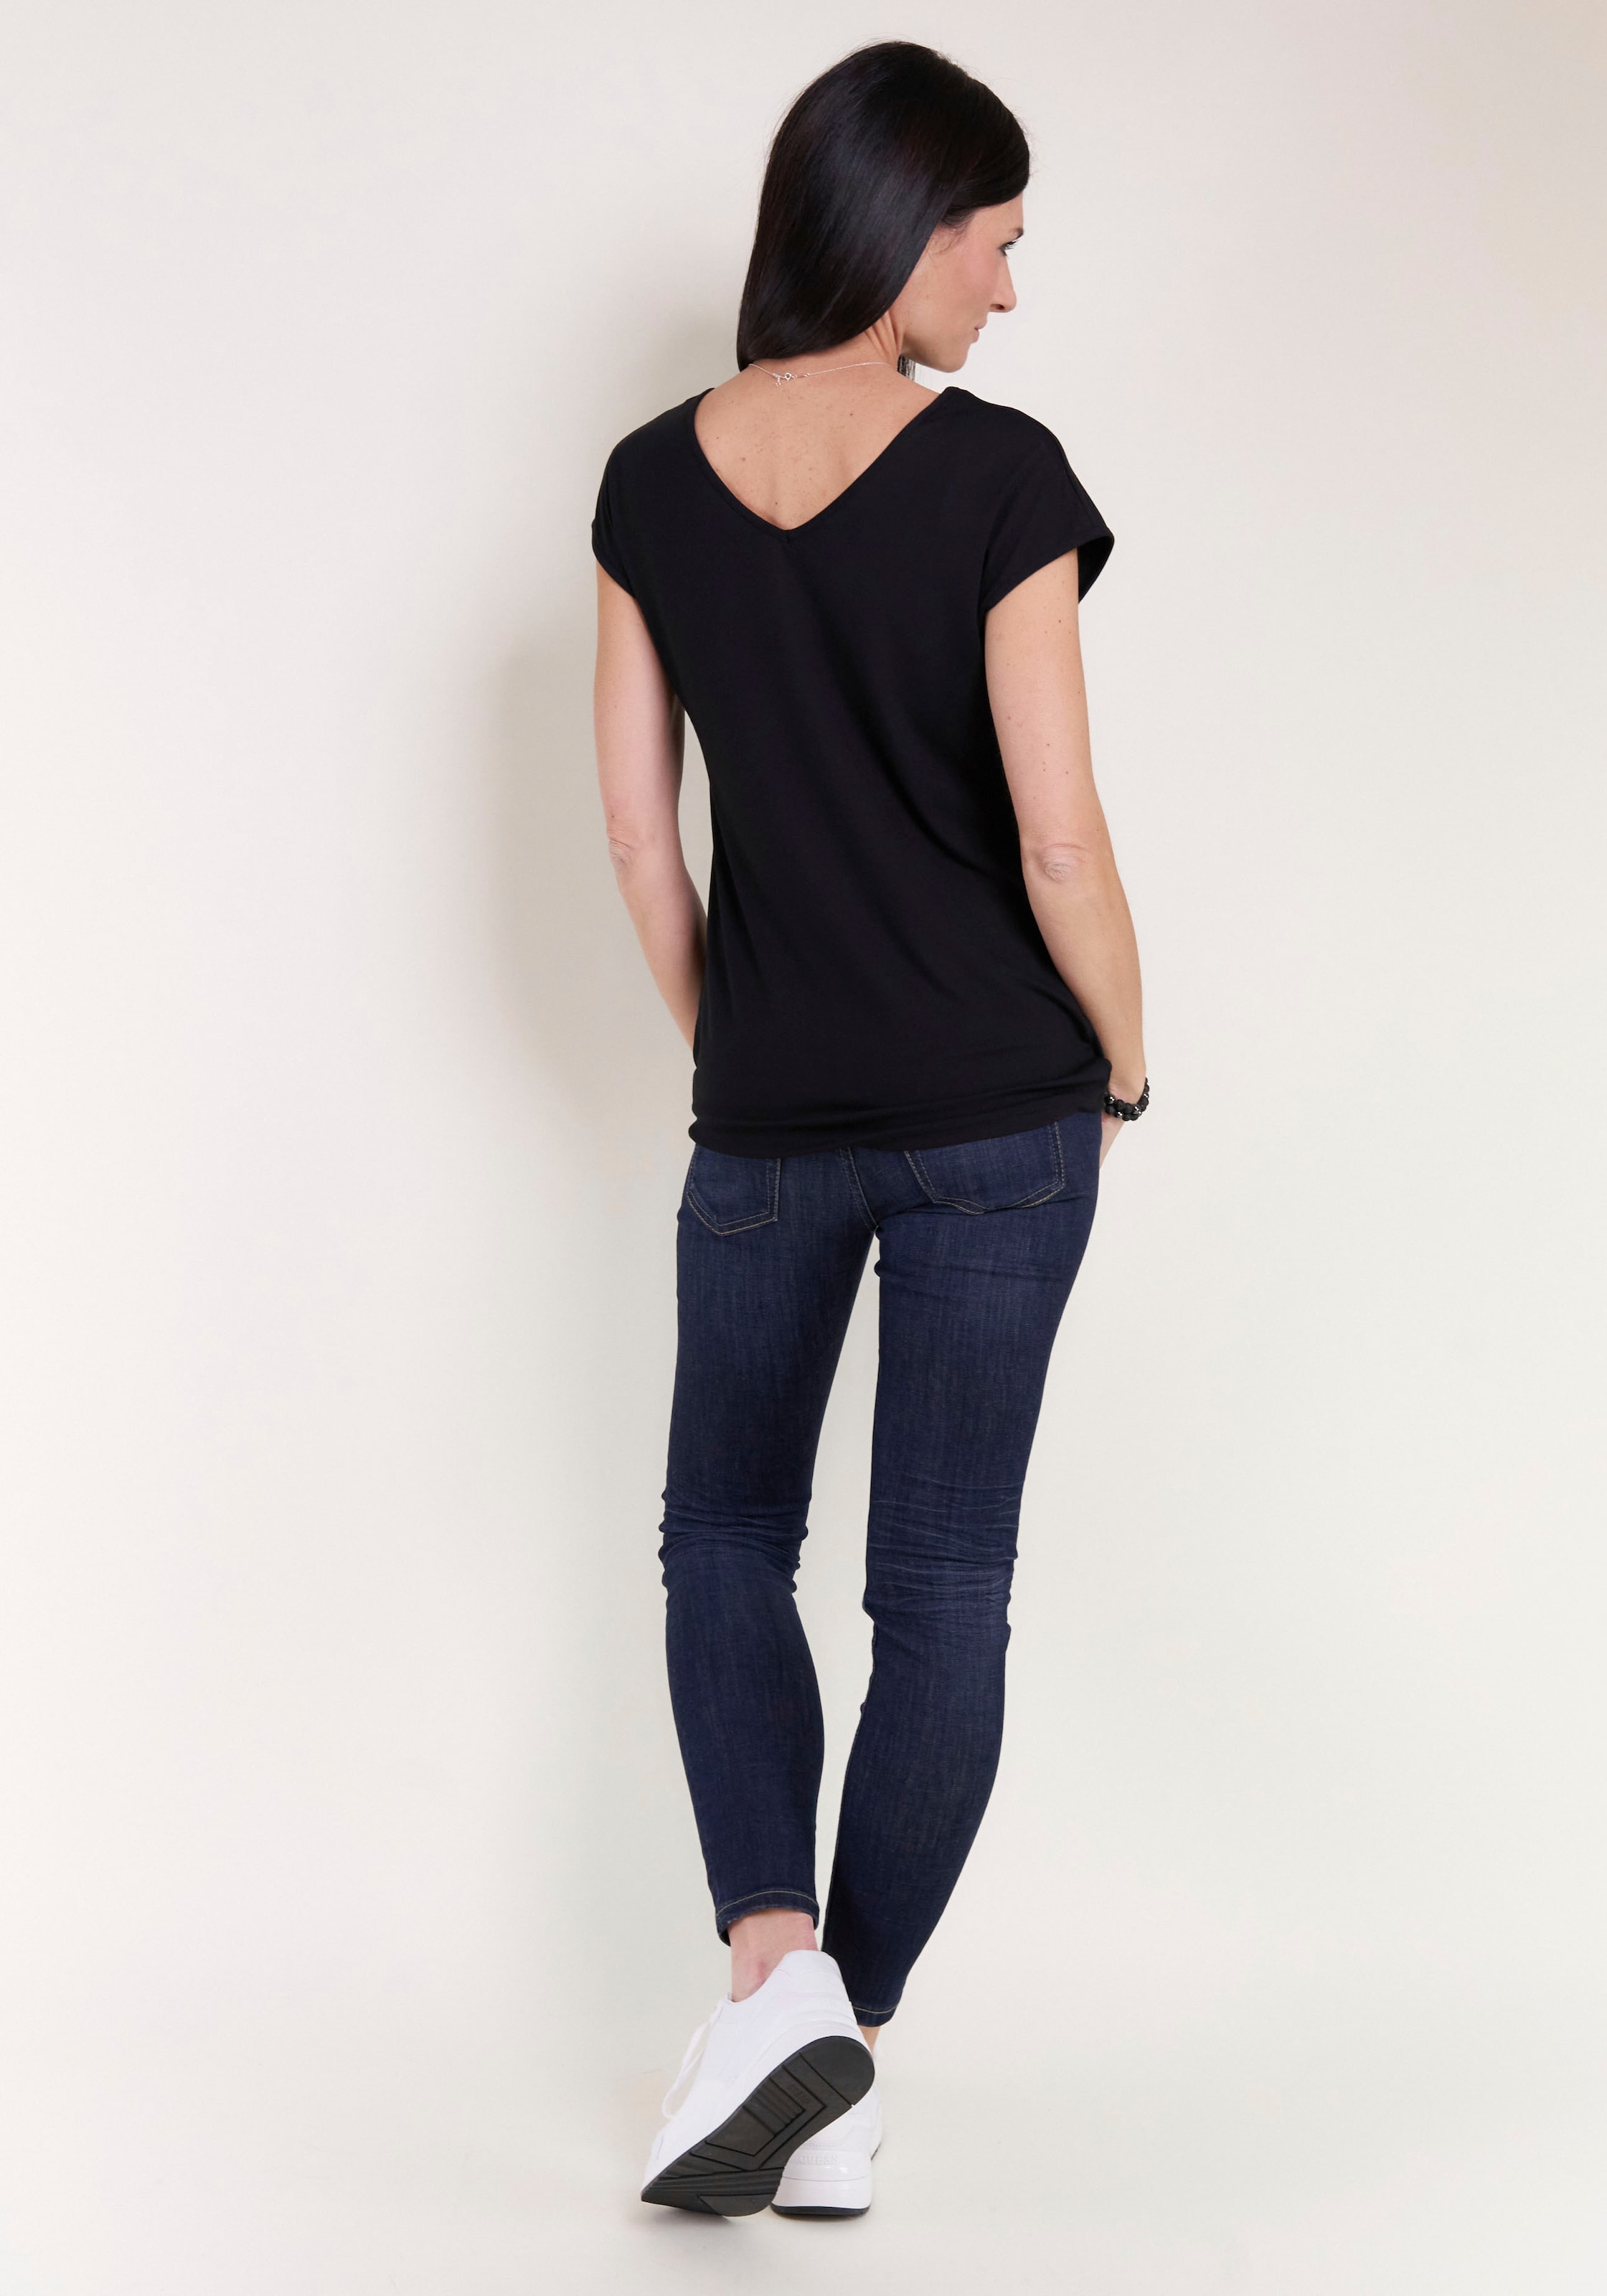 Seidel Moden Shirt in Black | ABOUT YOU